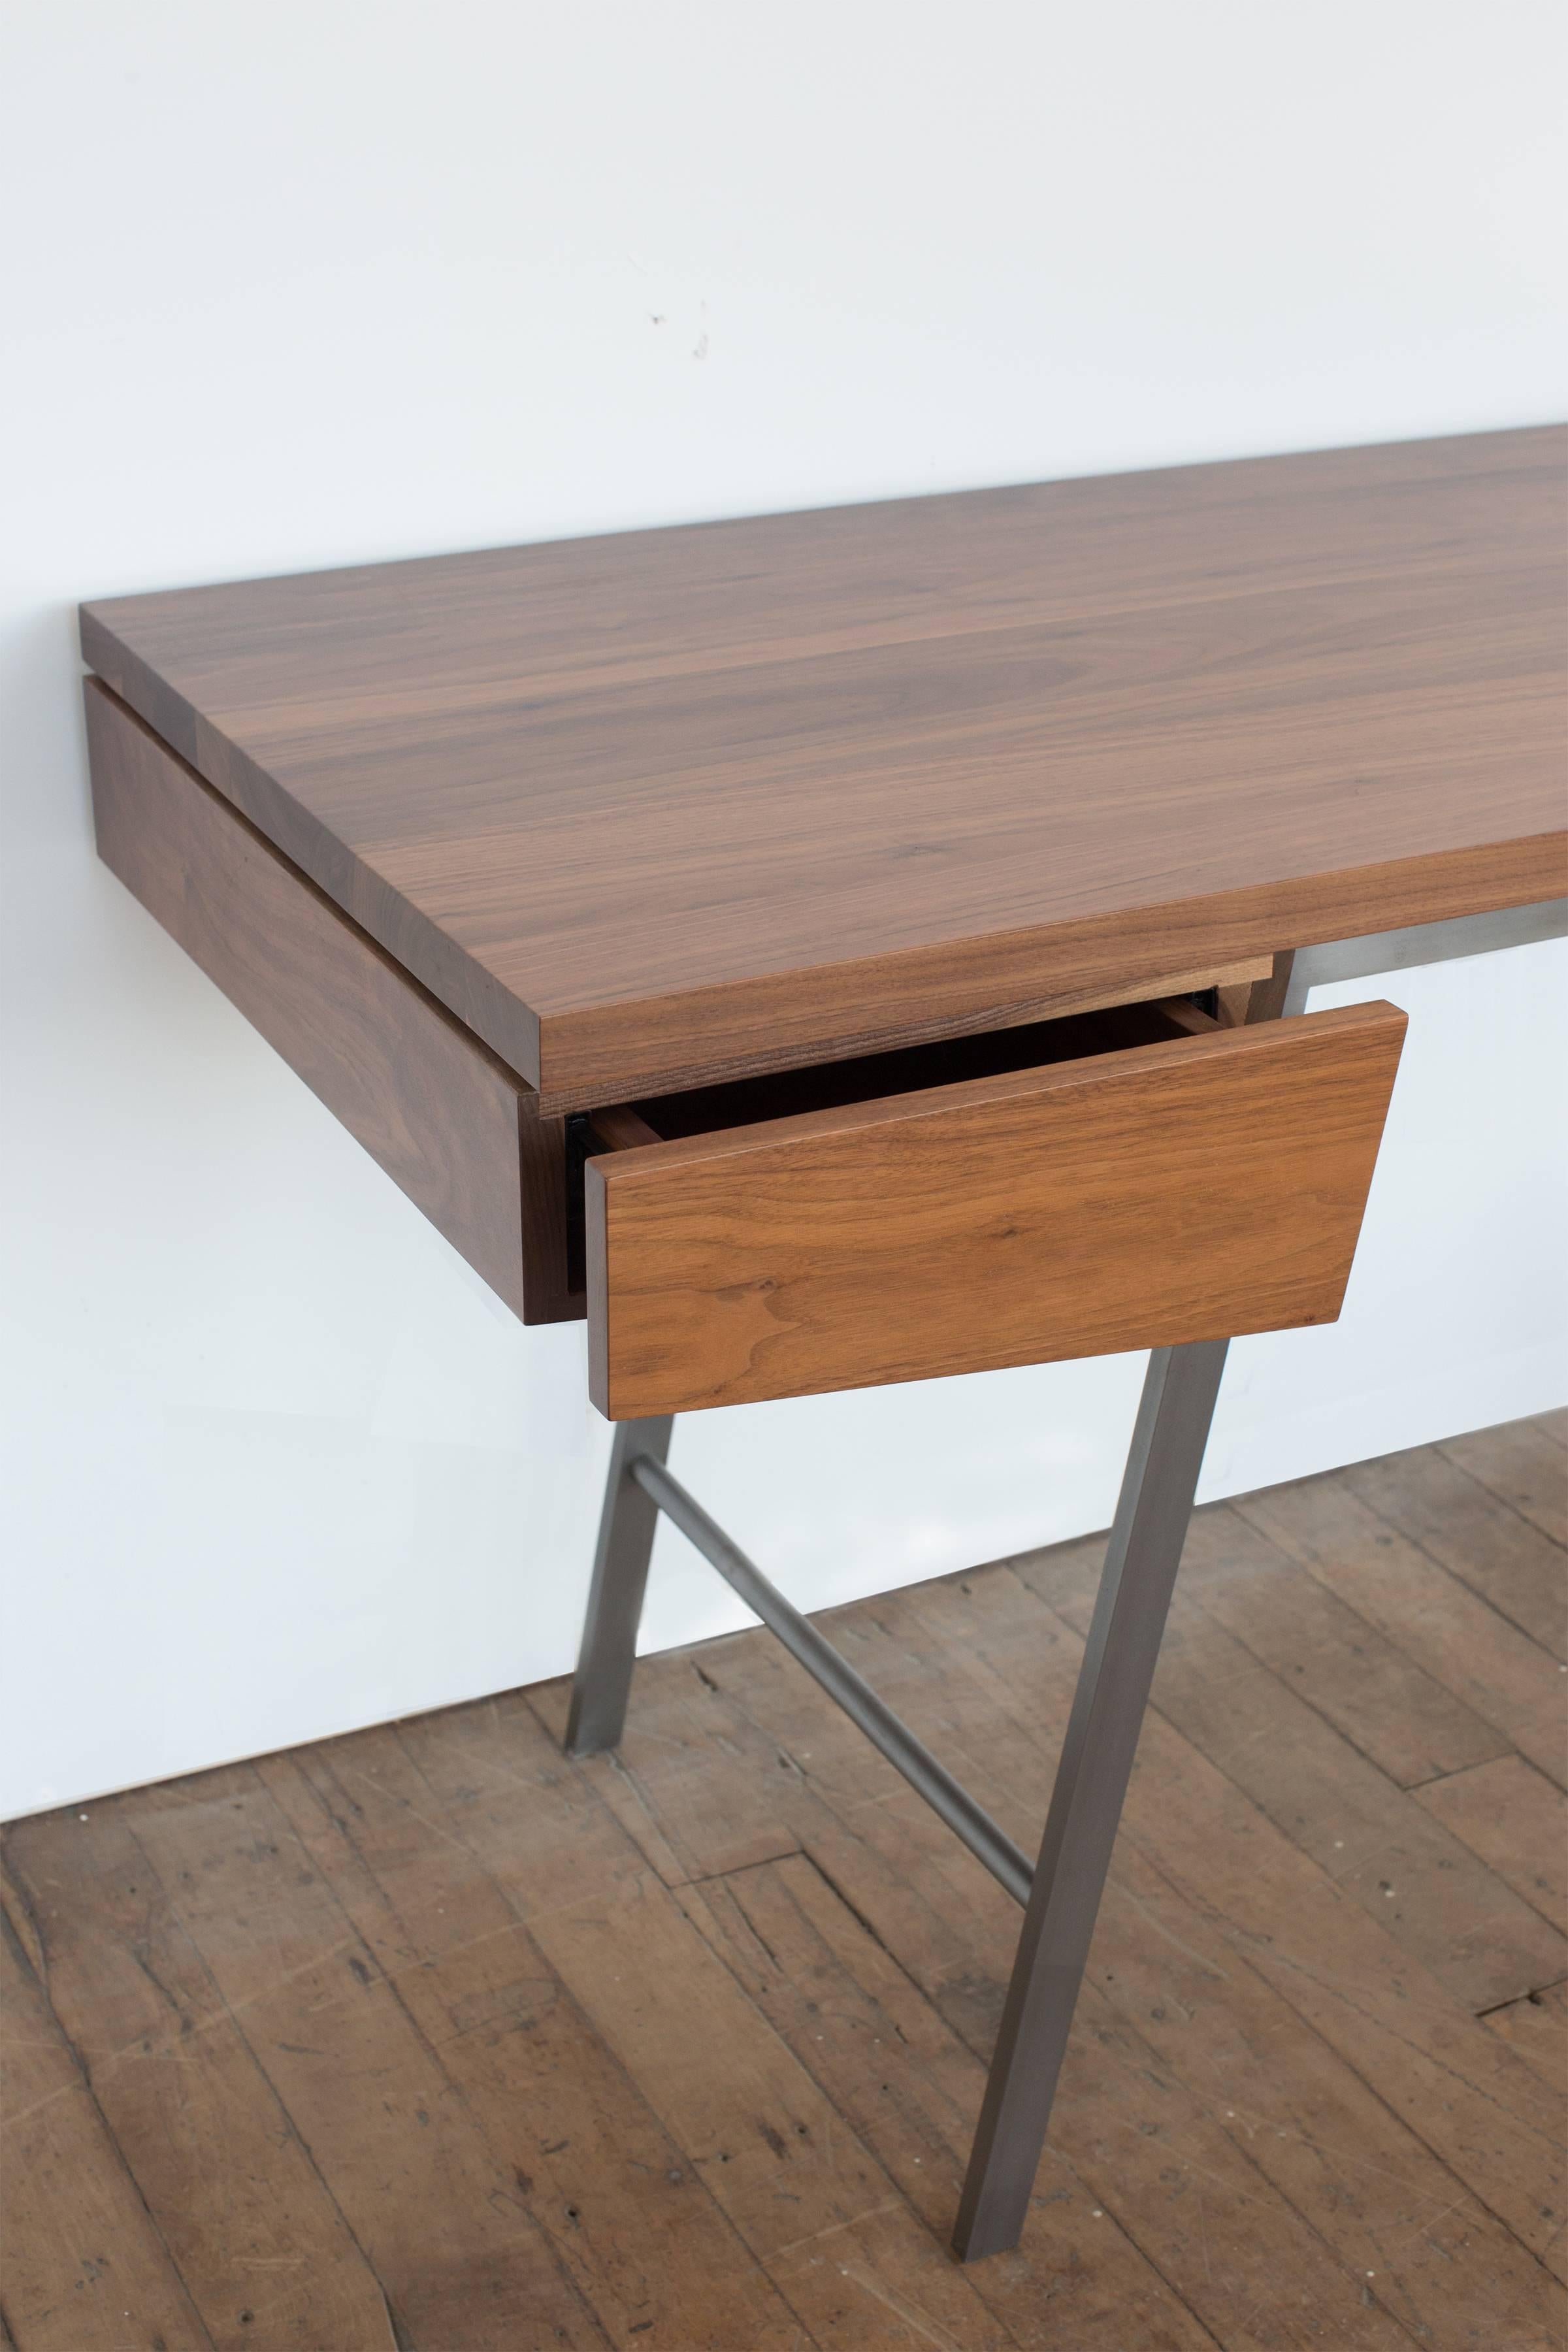 Spare, refined, and meticulously handcrafted of solid hardwoods and bronze, the AD7 desk is distinguished by superb detailing, the finest materials and timeless design. The composition plays with the relationship between positive and negative space,